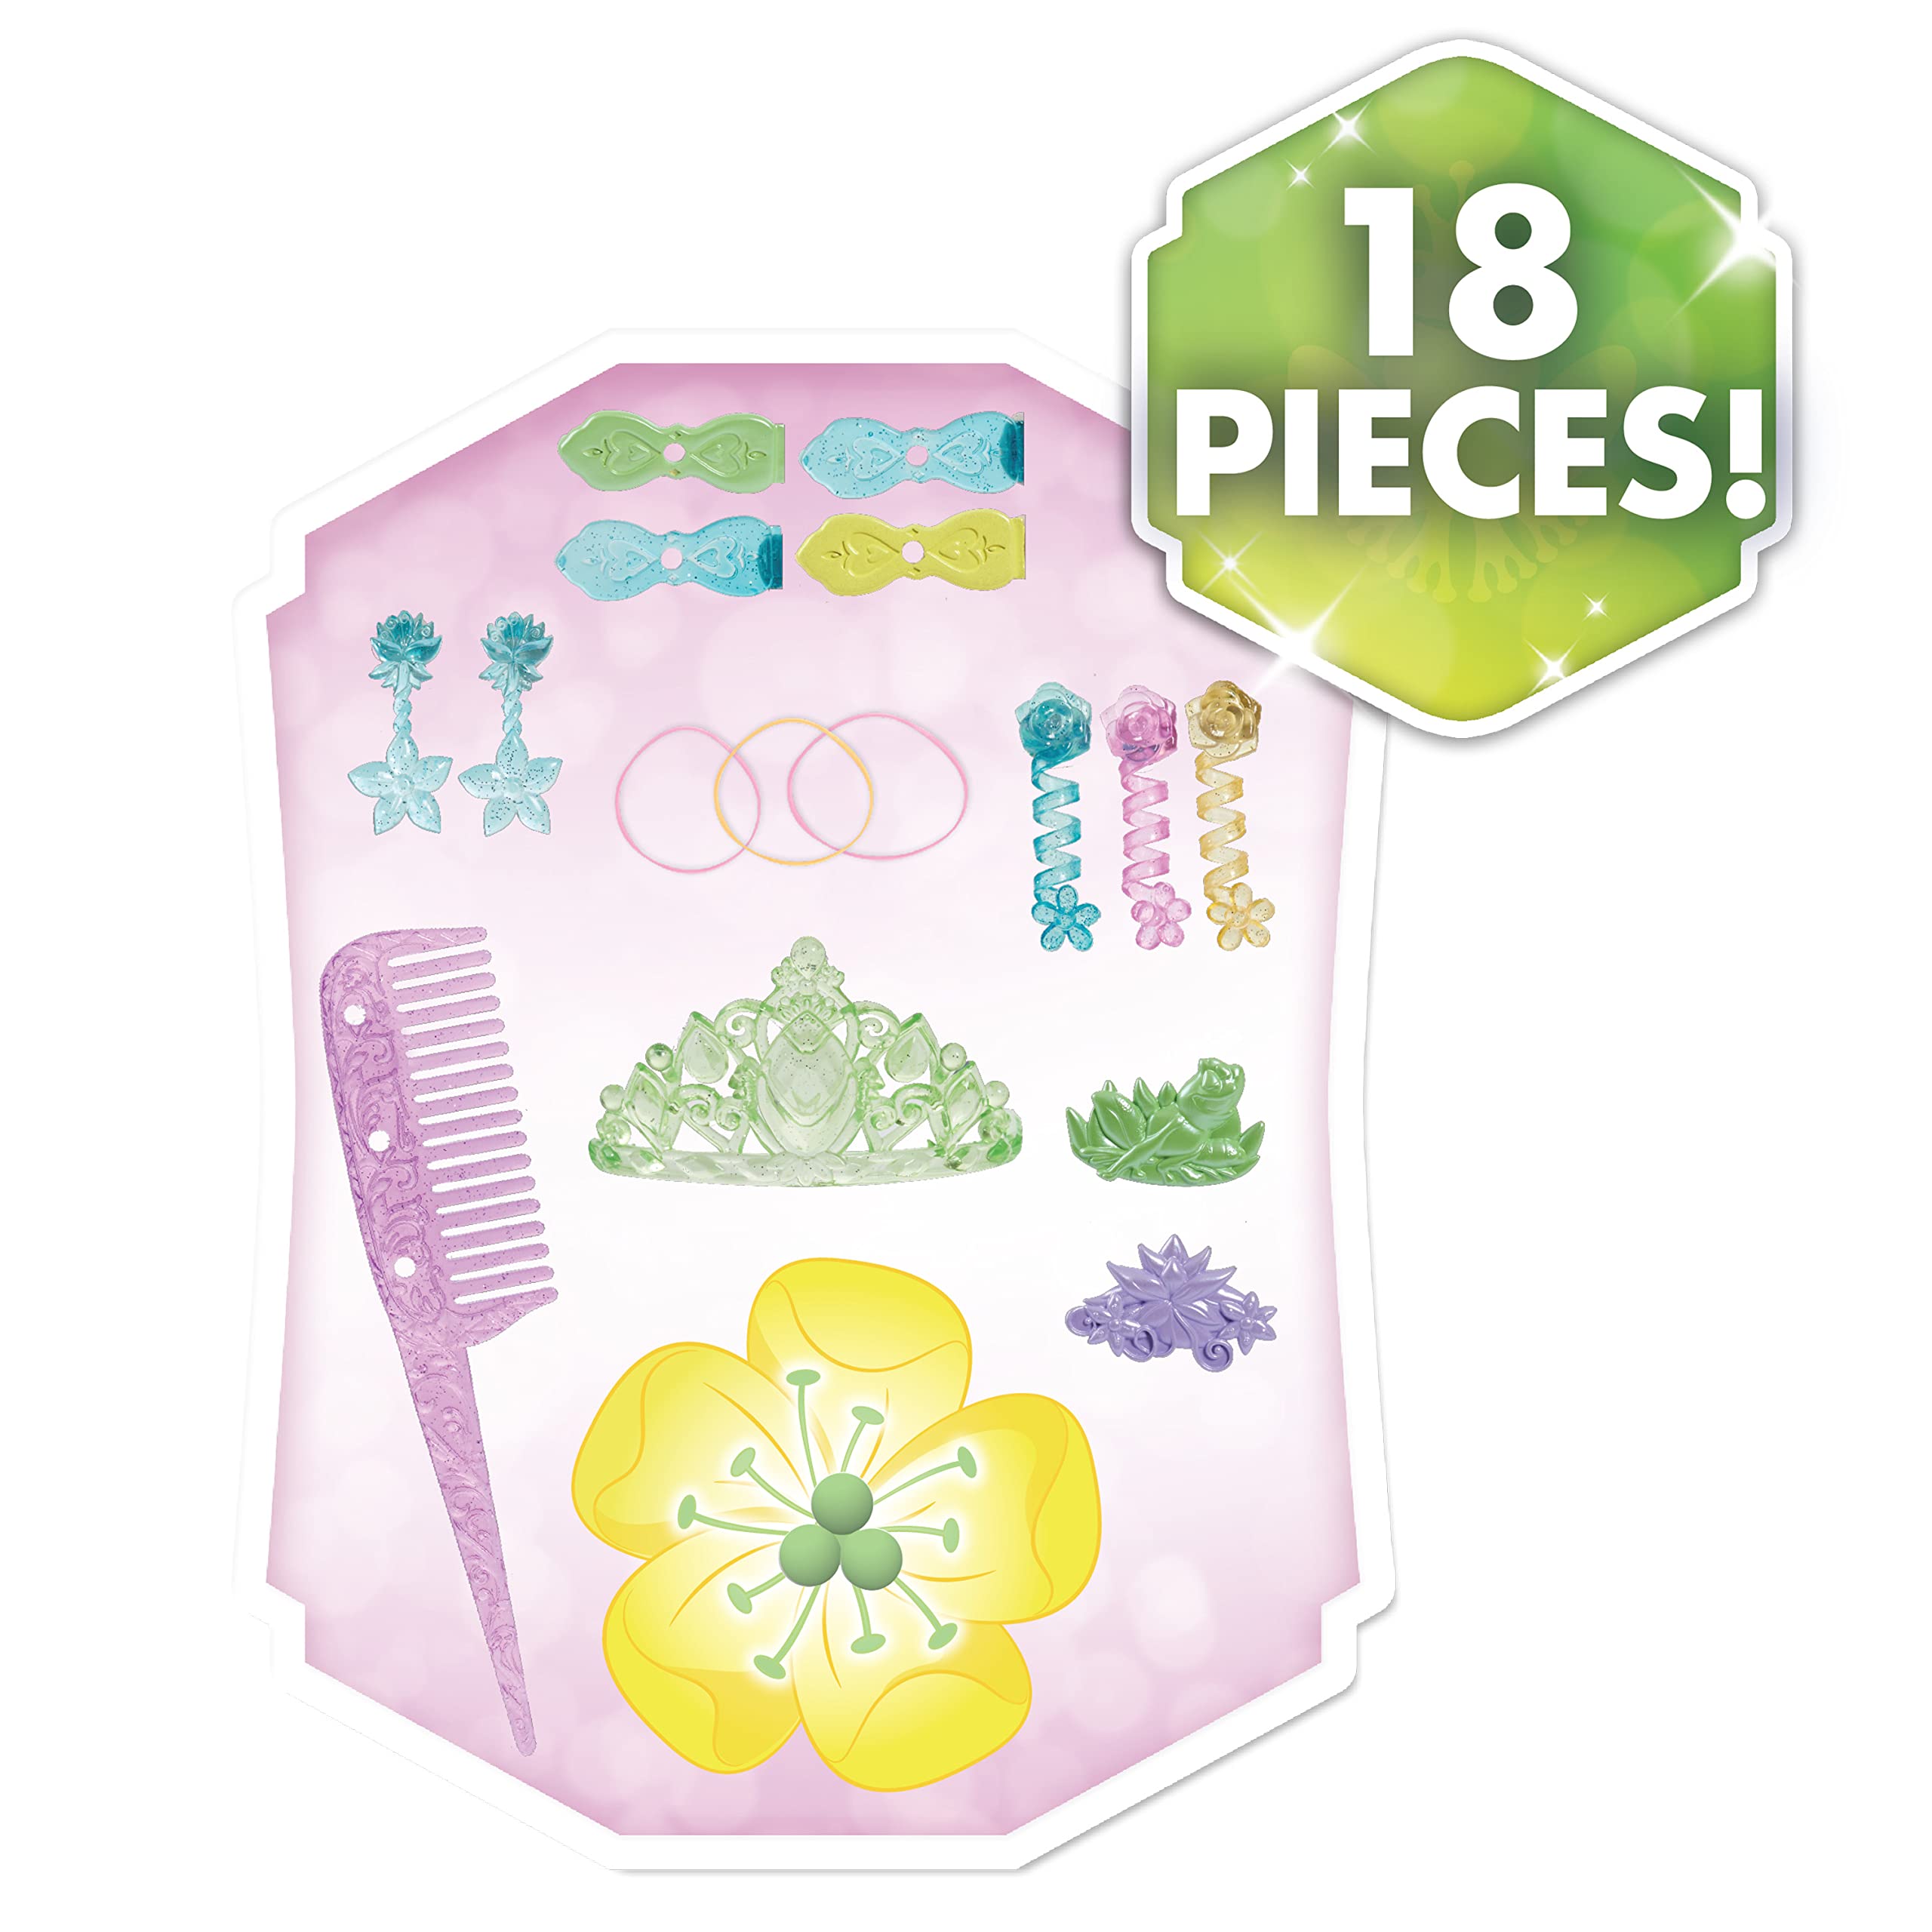 Disney Princess Tiana Styling Head, 18-Pieces, Pretend Play, Officially Licensed Kids Toys for Ages 3 Up, Gifts and Presents by Just Play